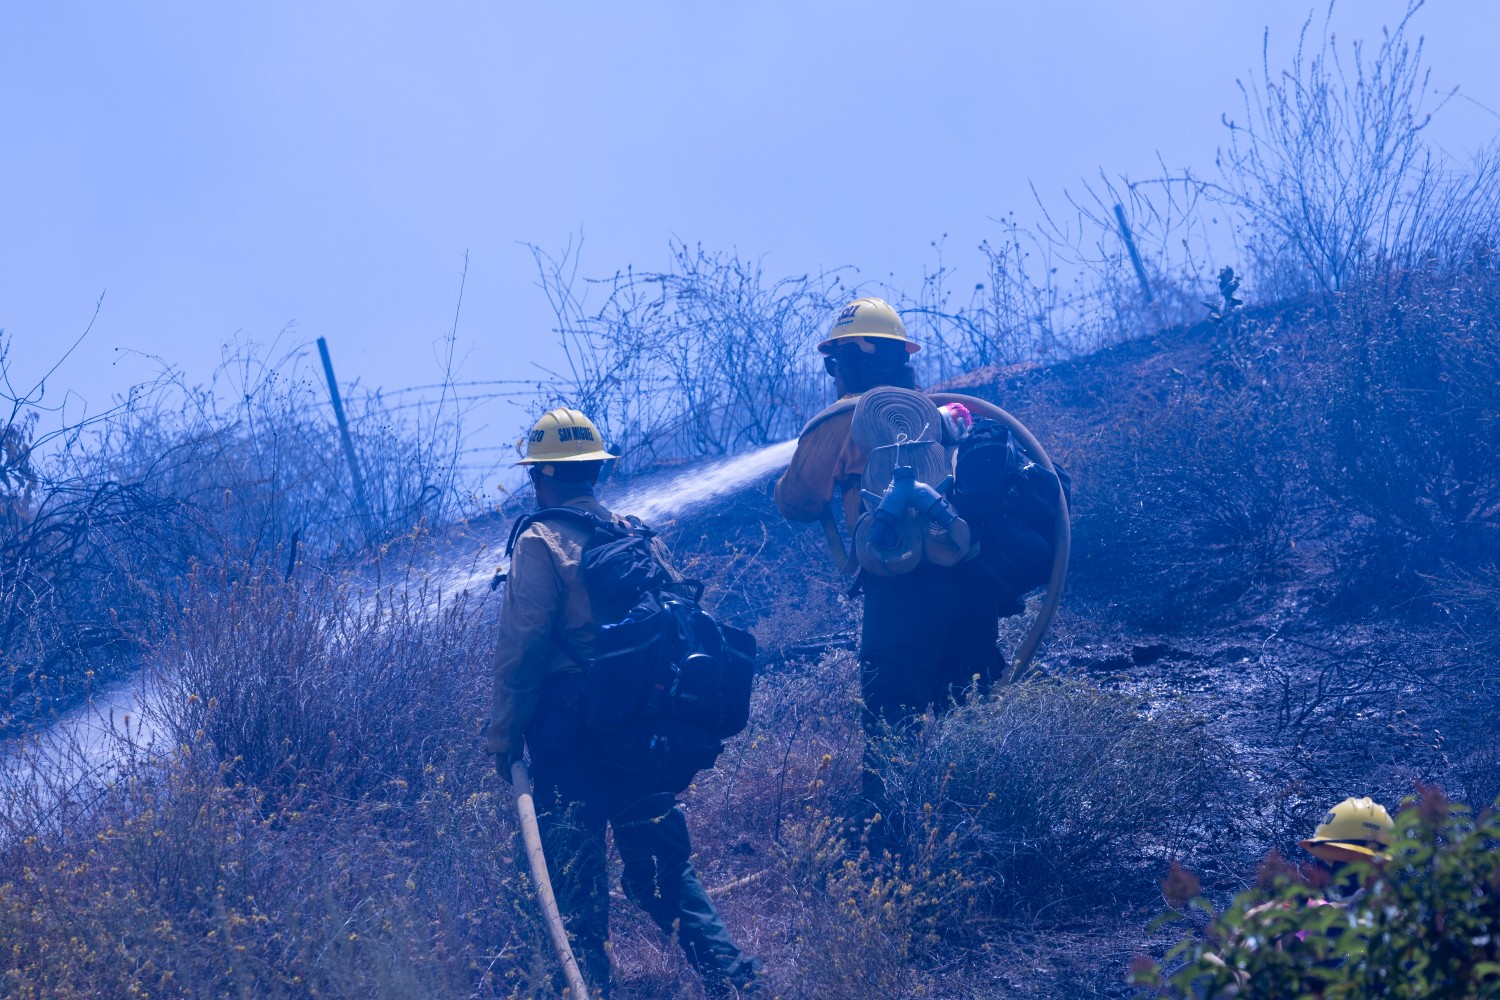 Firefighters in California